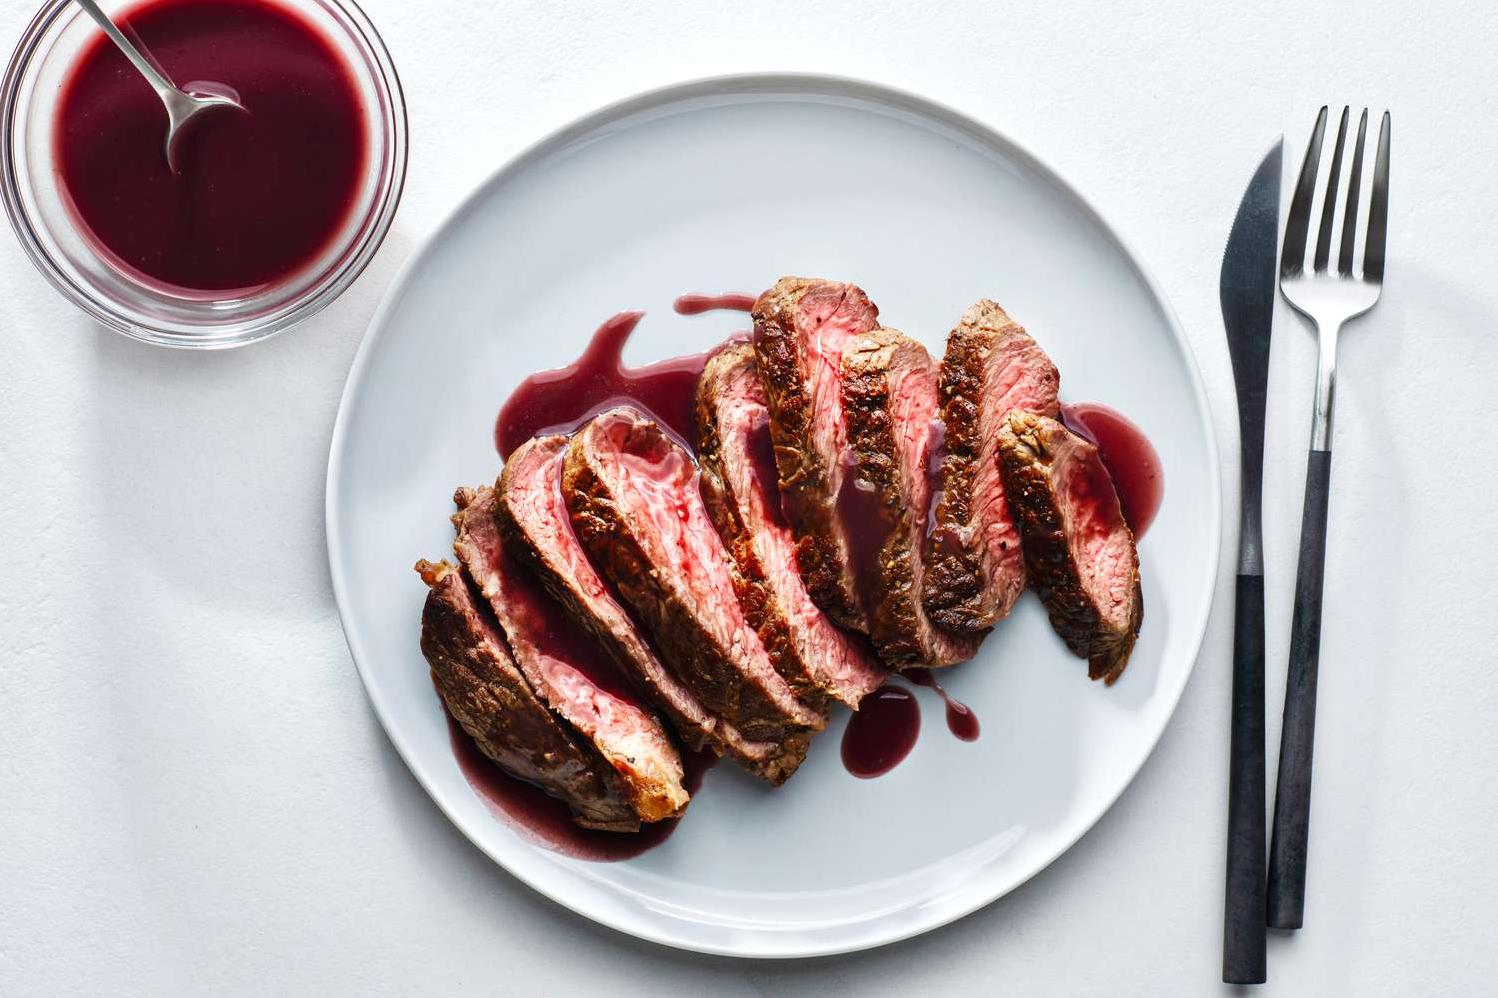  This is what steak dreams are made of--a heavenly sauce paired with seared meat